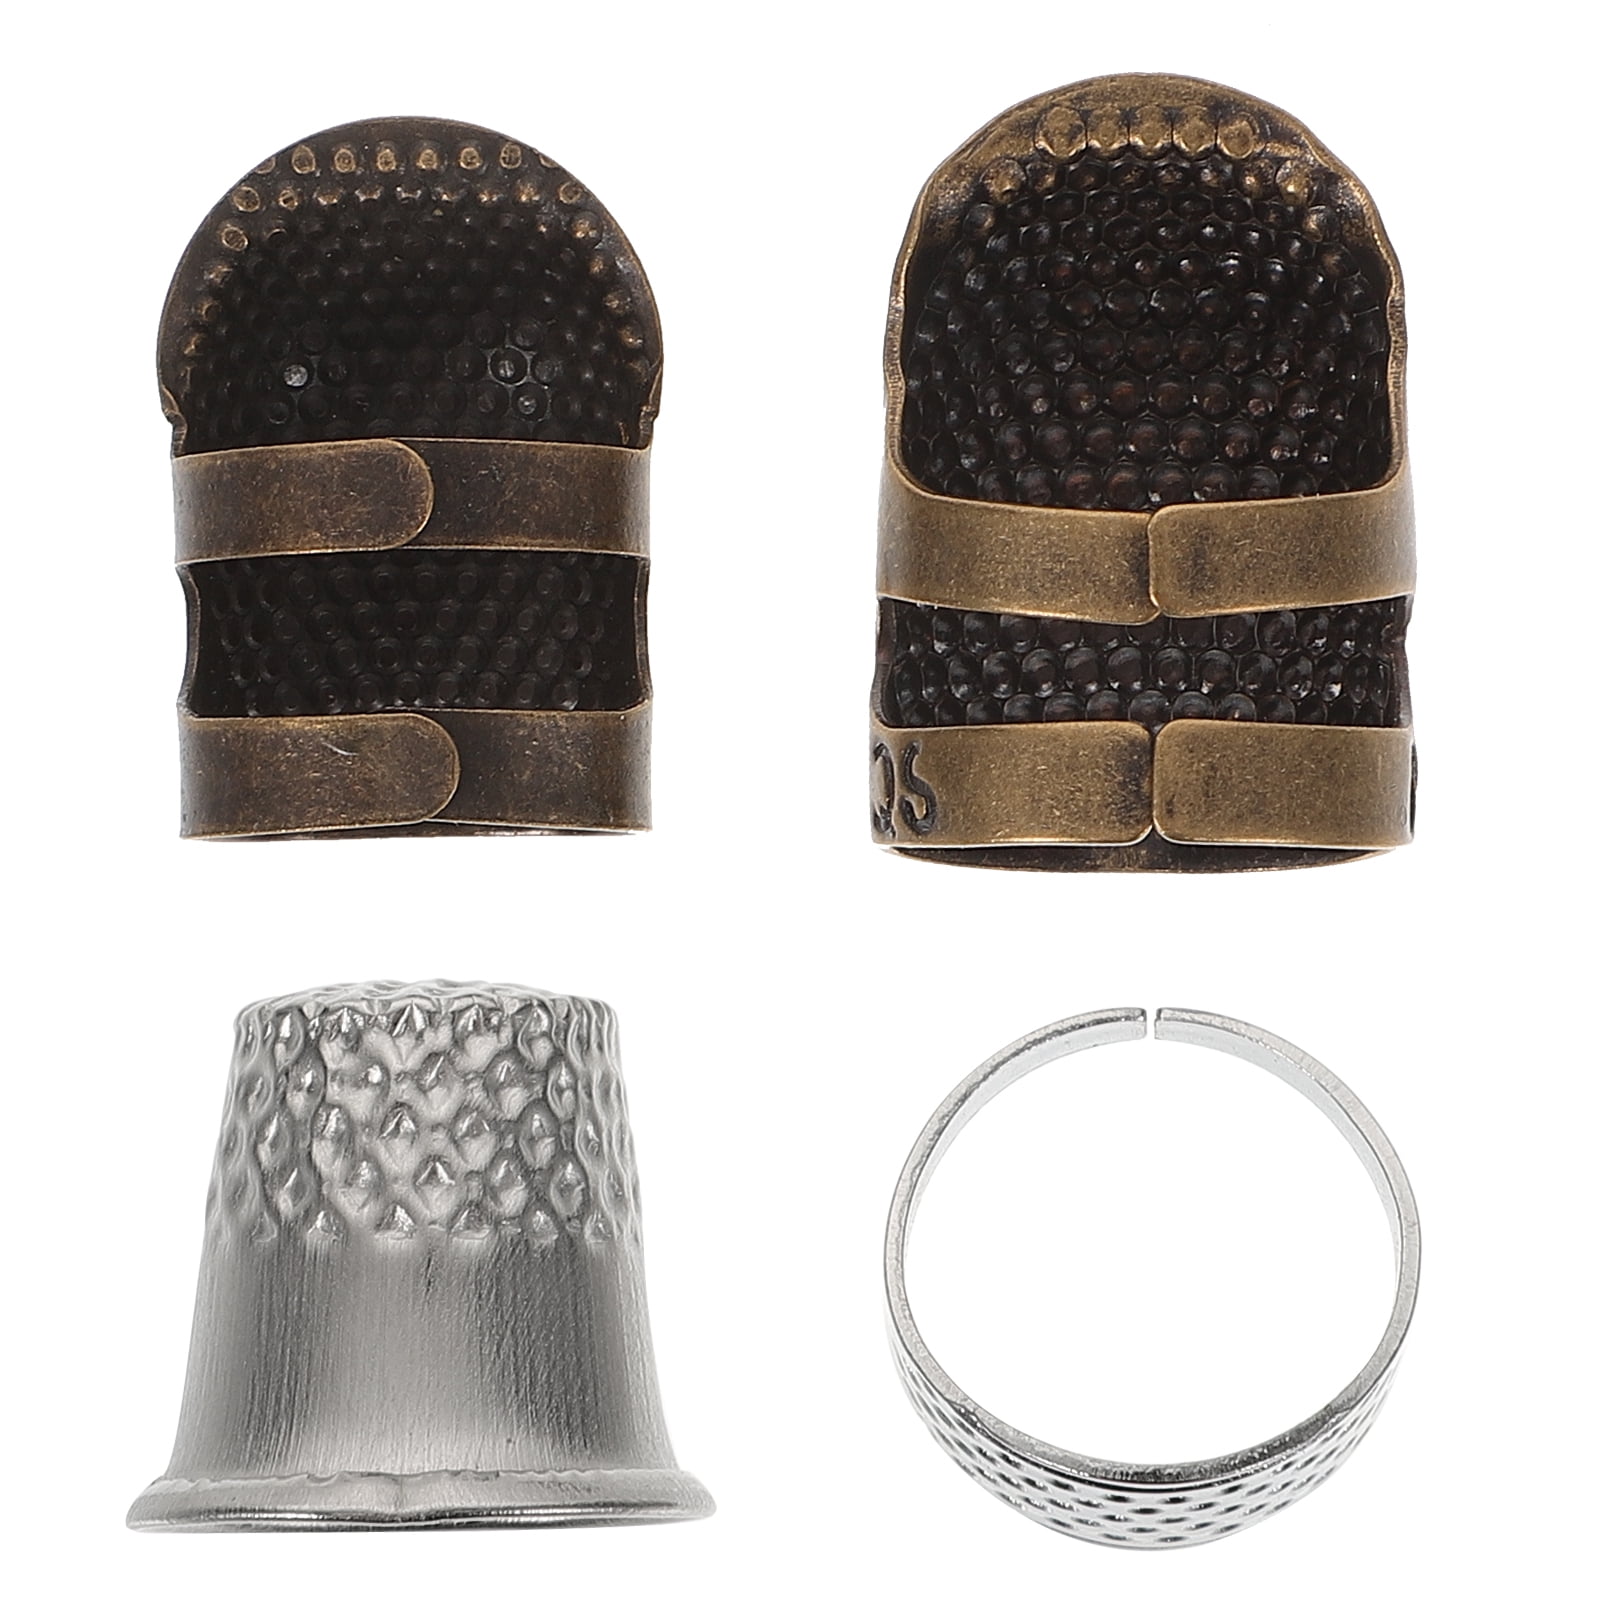  Leather Sewing Thimble - losharher Ring Thimbles for